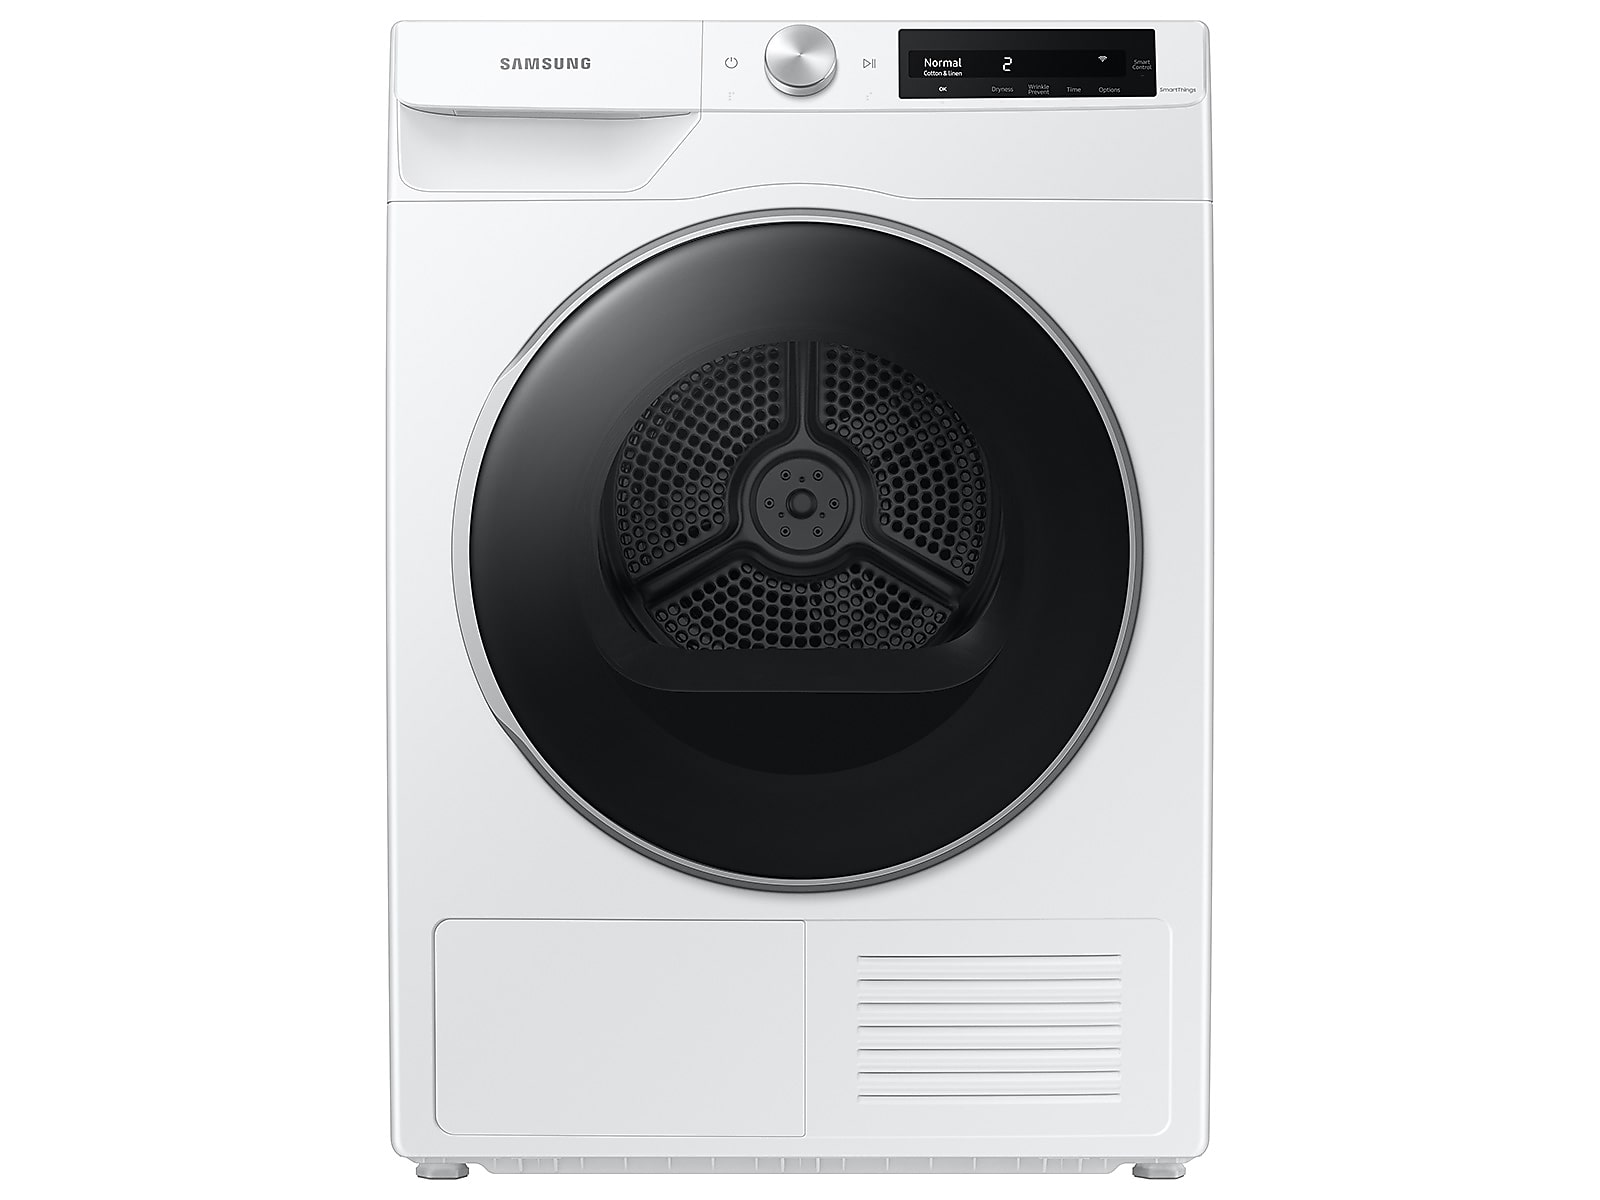 Samsung 4.0 cu. ft. Heat Pump Dryer with AI Smart Dial and Wi-Fi Connectivity in White(DV25B6900HW/A2)